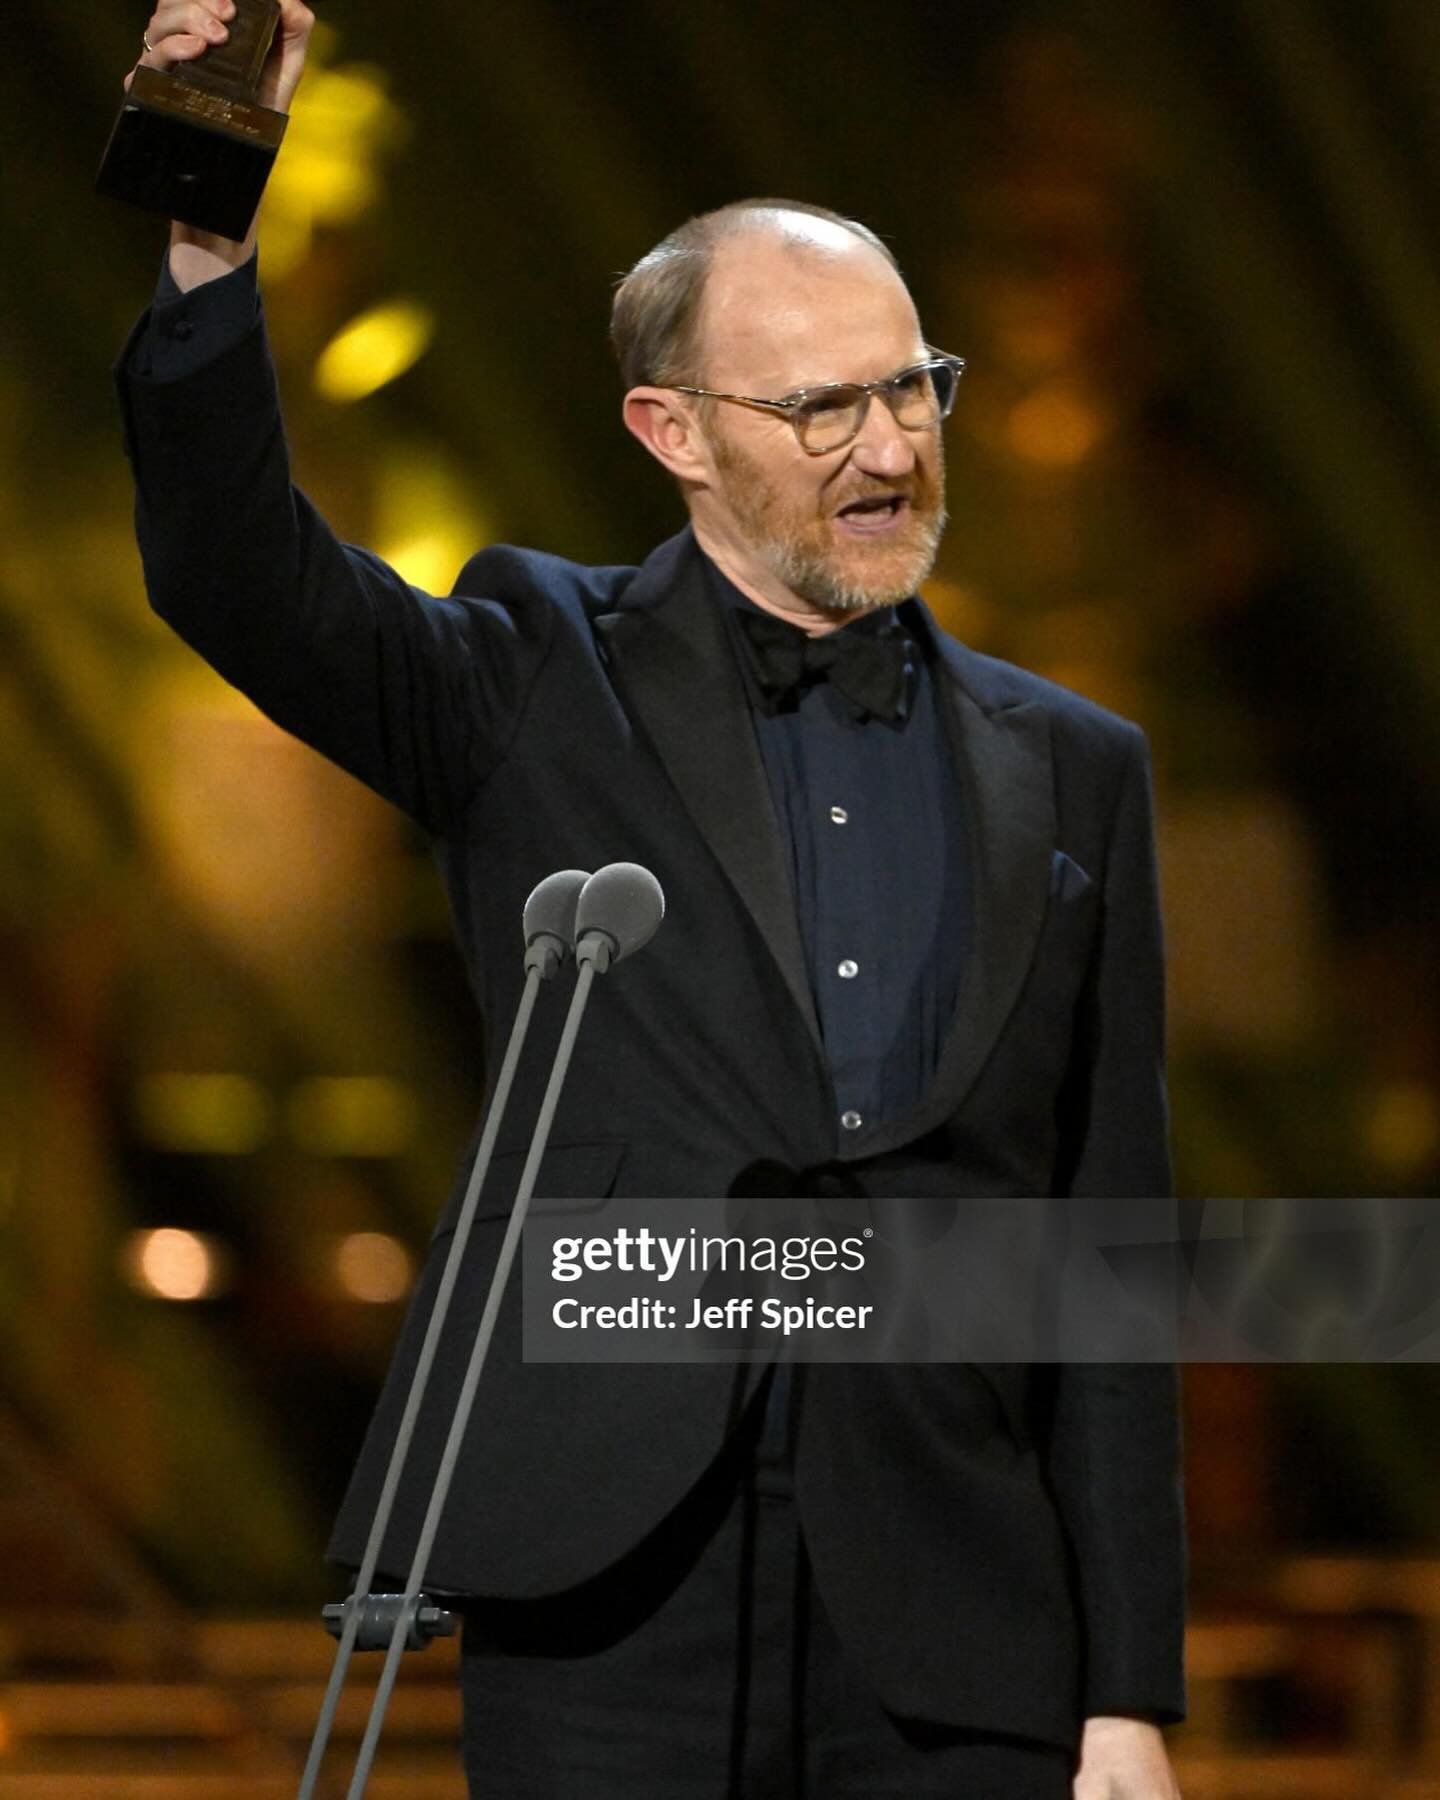 #RKPR client #MarkGatiss wins Best Actor at this years @olivierawards for his role as Sir John Gielgud in @motiveandthecue directed by #SamMendes and written by #JackThorne. 

Styled by @tanjamartinstylist in @favourbrook 
Grooming by @rebeccarichard